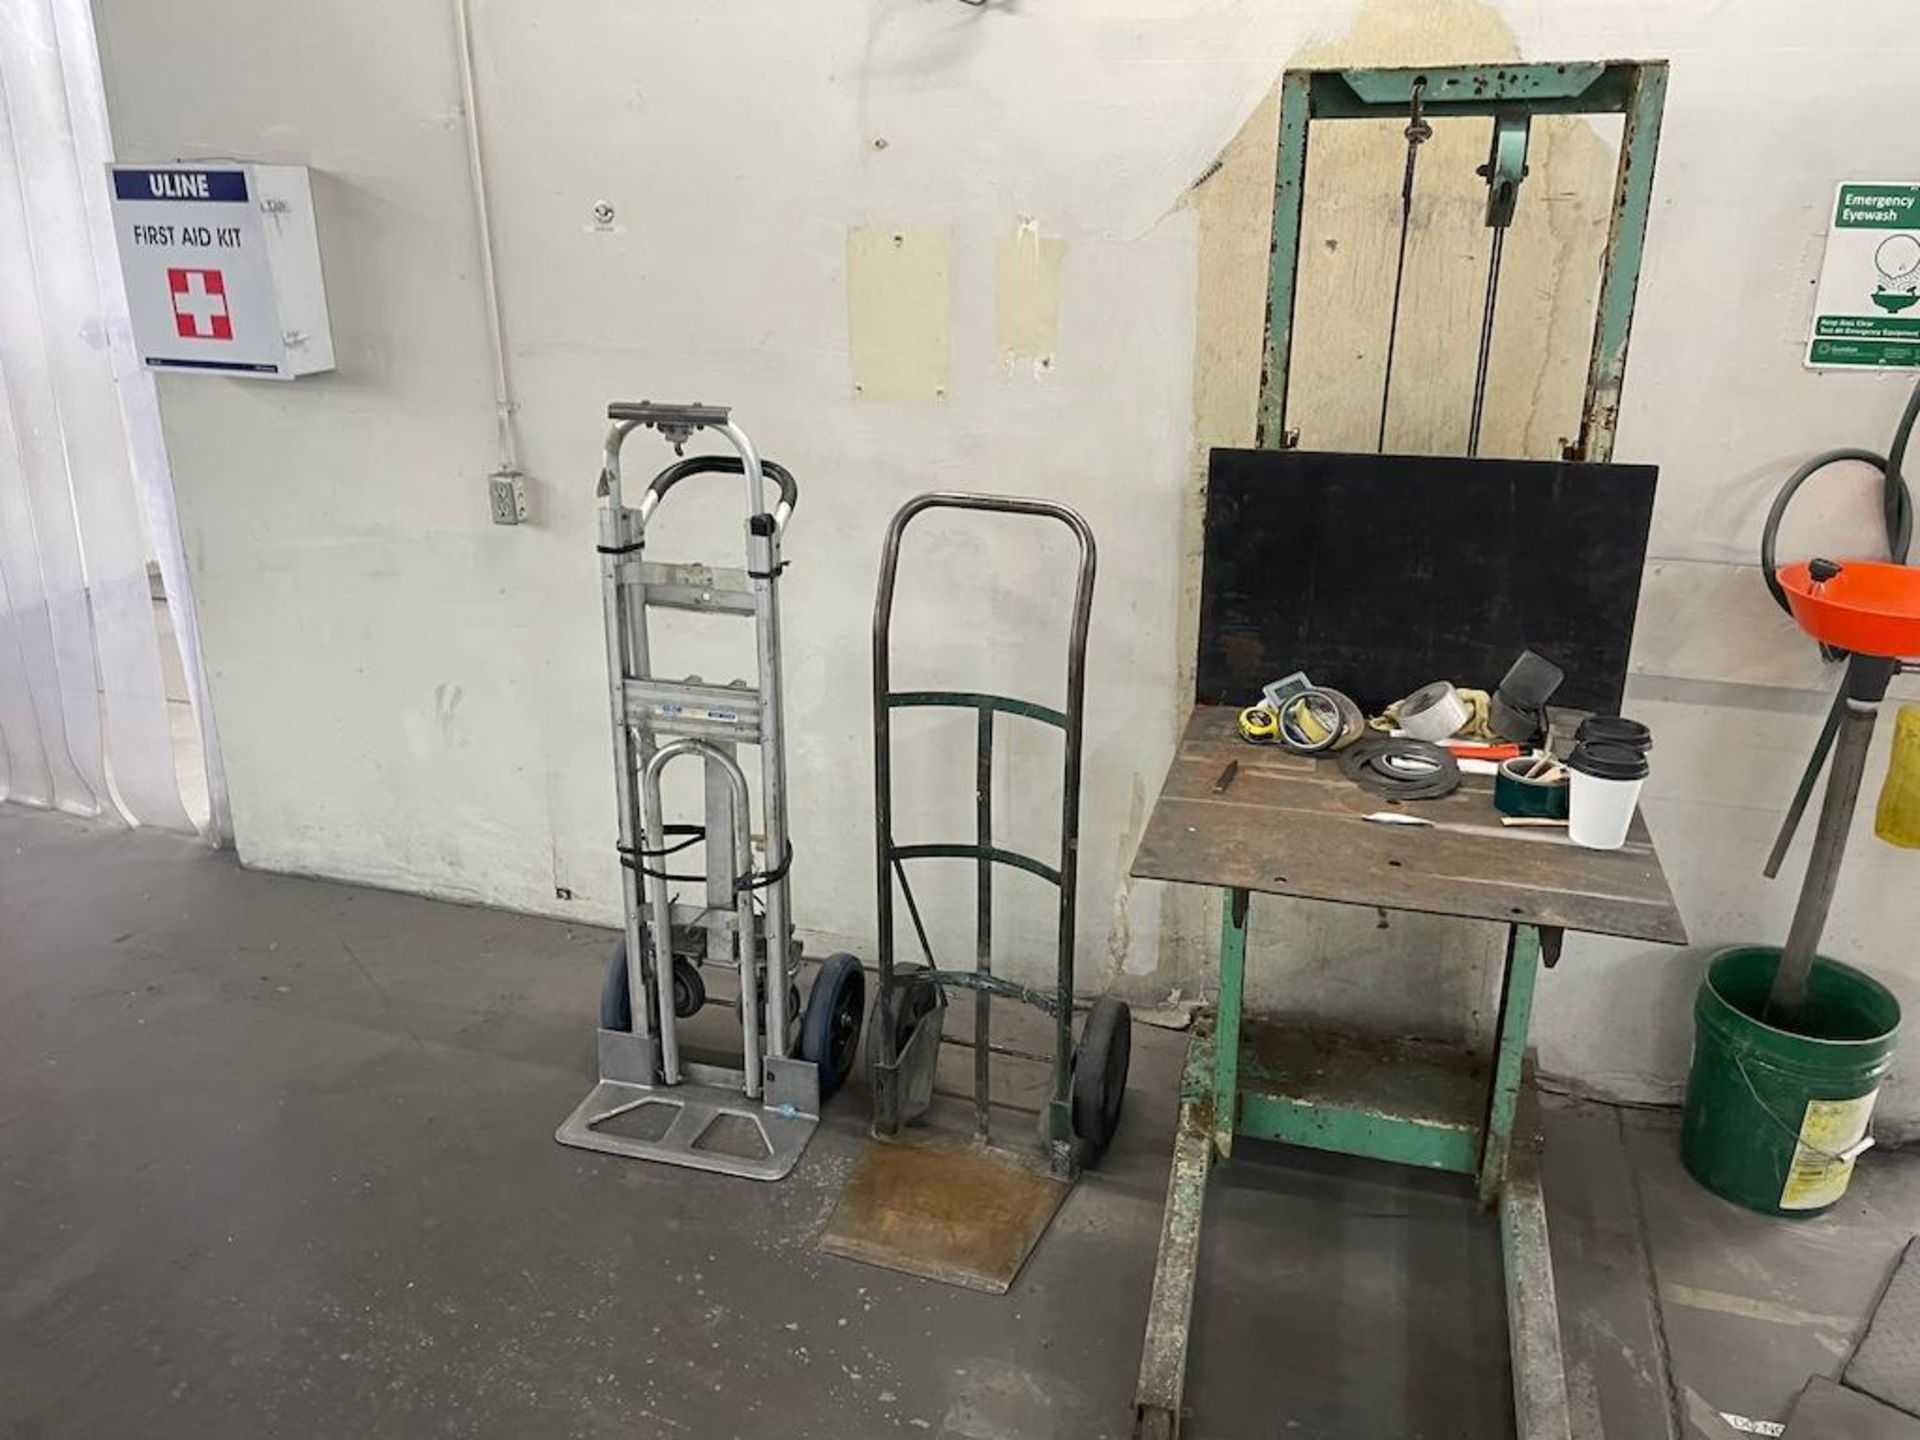 LOT DIE LIFT AND (2) 2 WHEEL DOLLIES